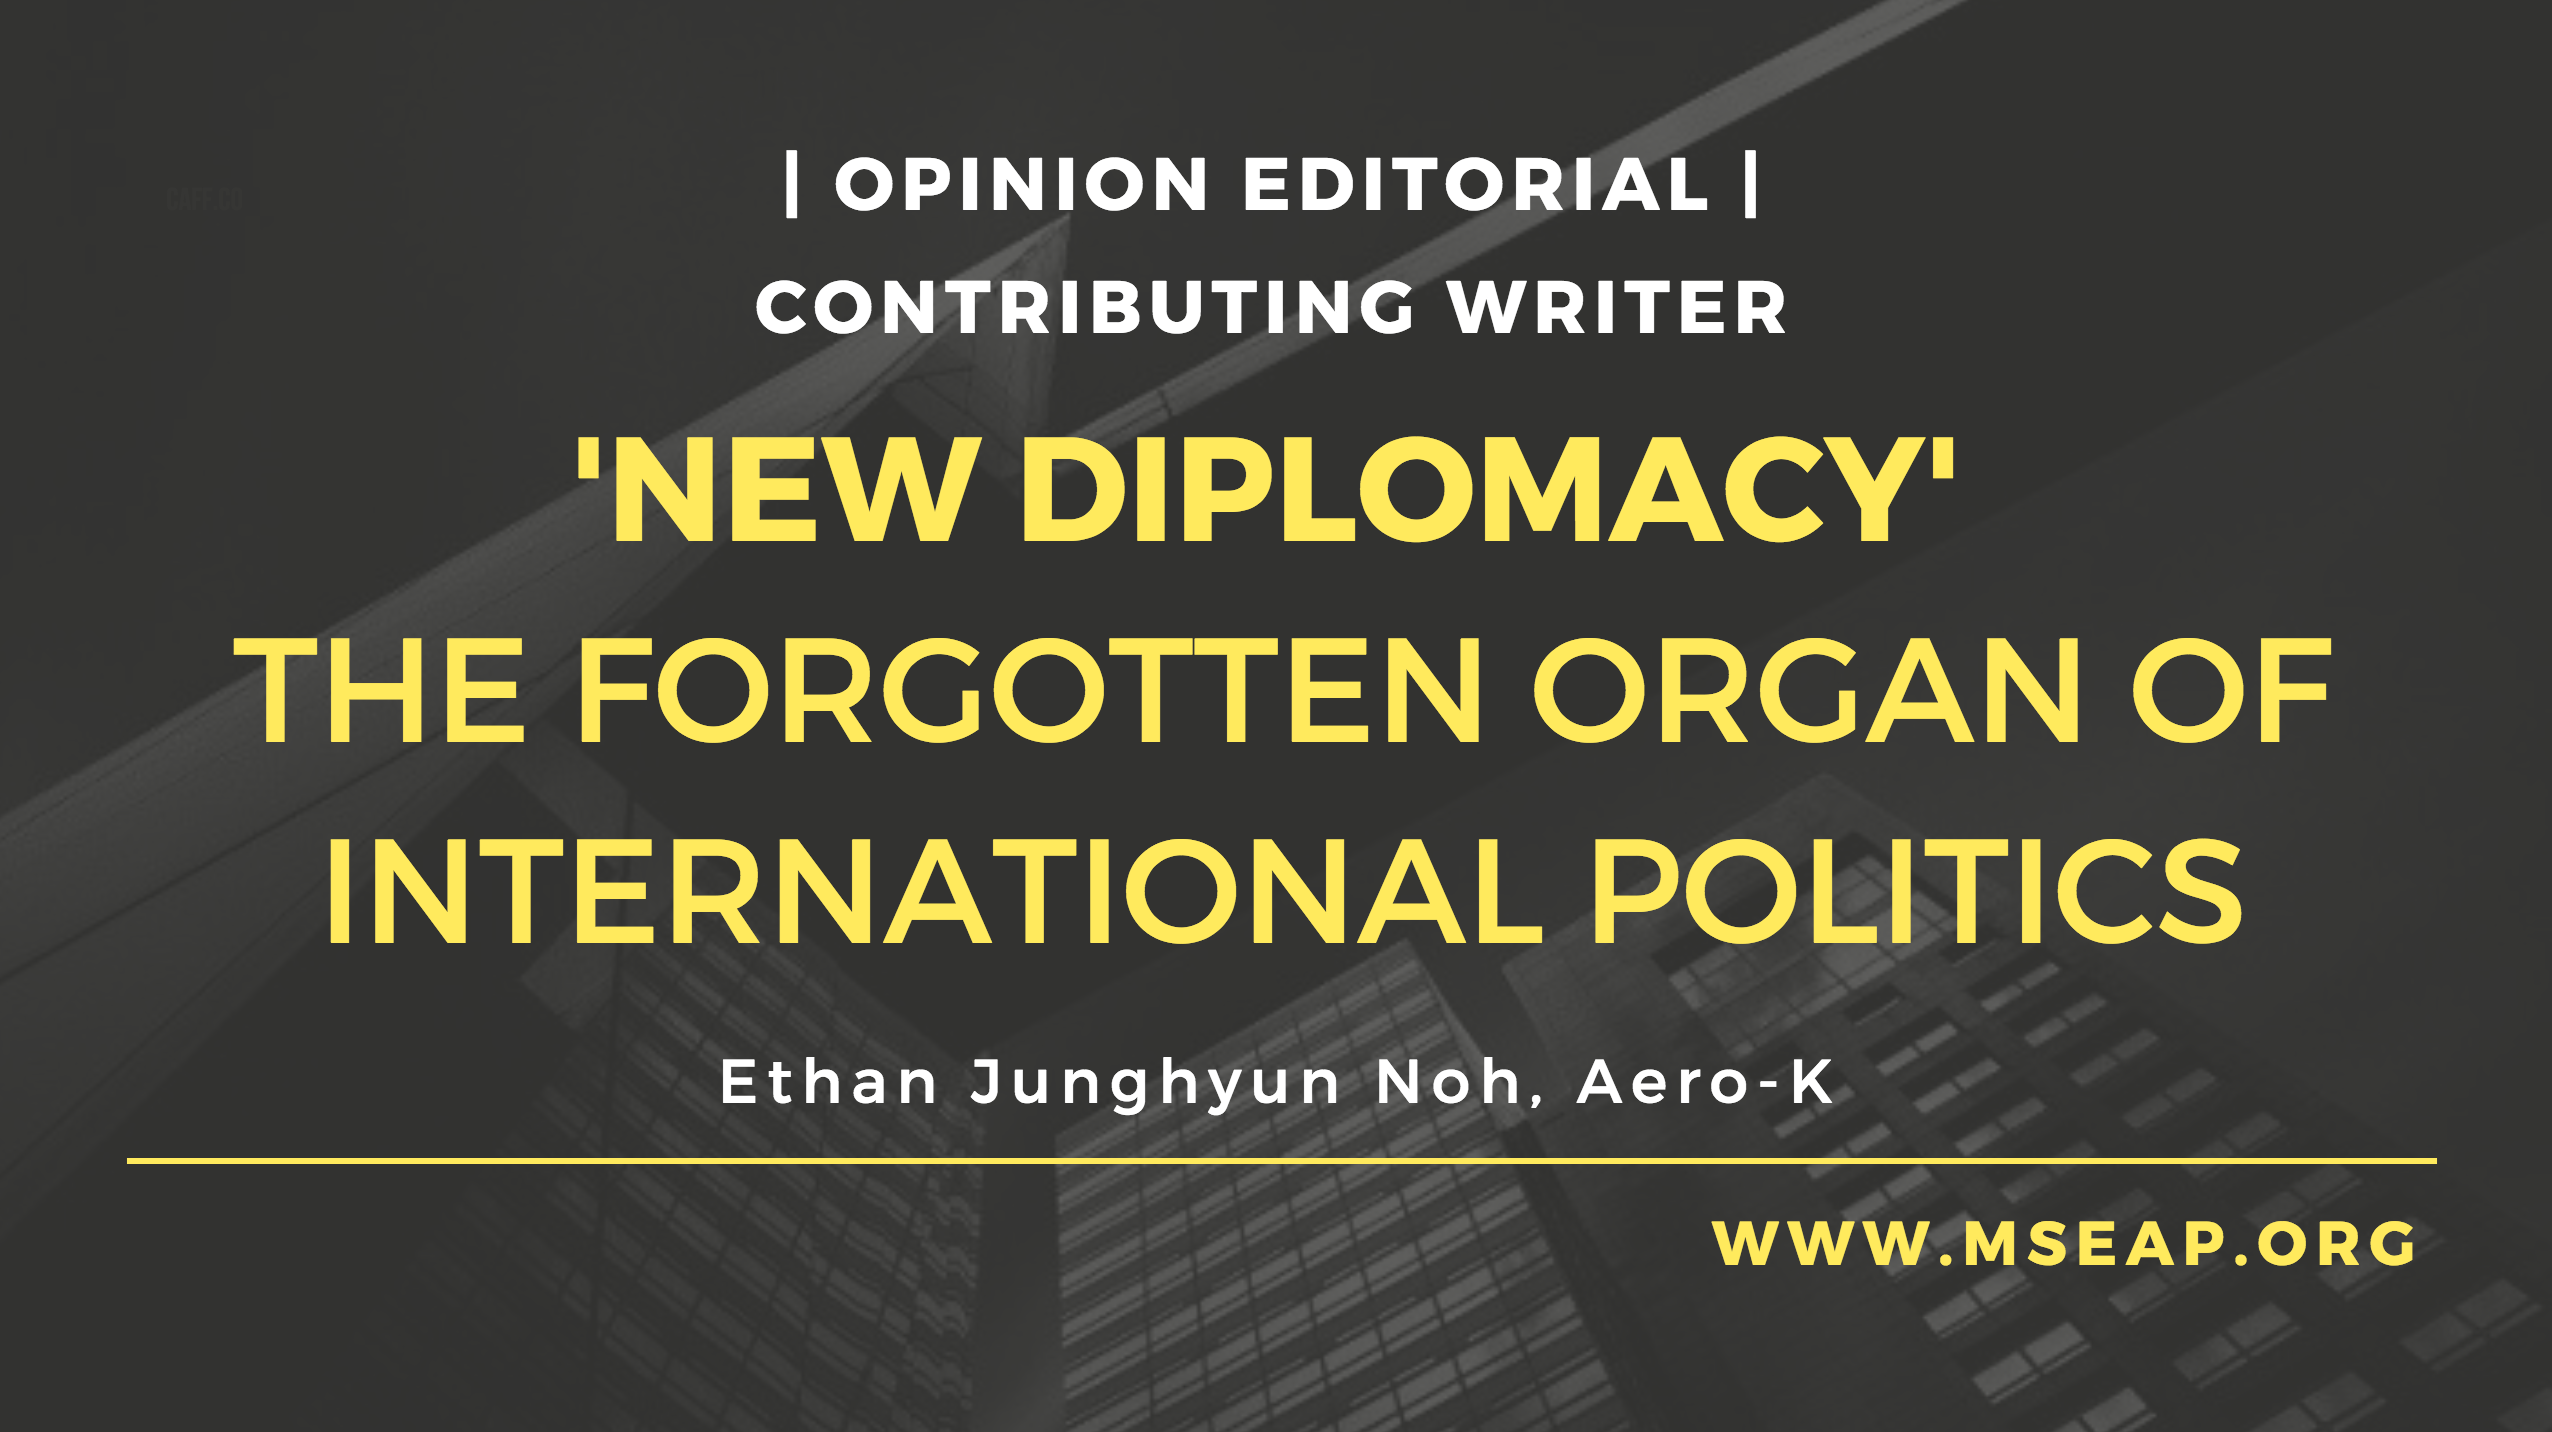 [Opinion Editorial] New Diplomacy: The forgotten organ of international politics and how it can conceive the next paradigm shift